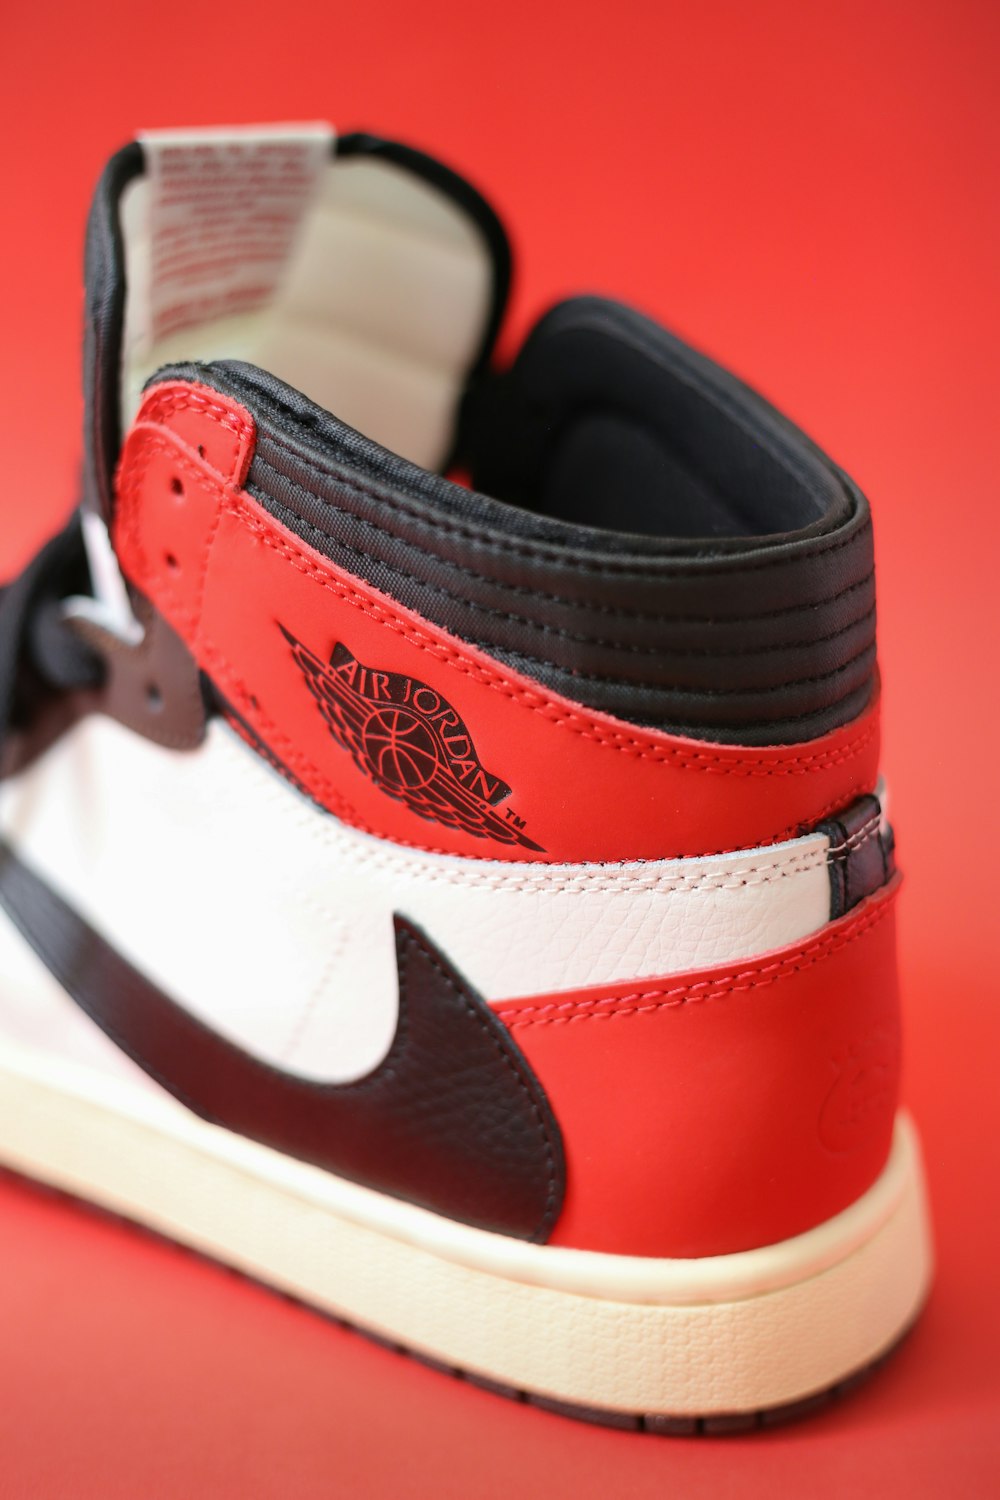 red and white nike high top sneakers photo – Free Image on Unsplash